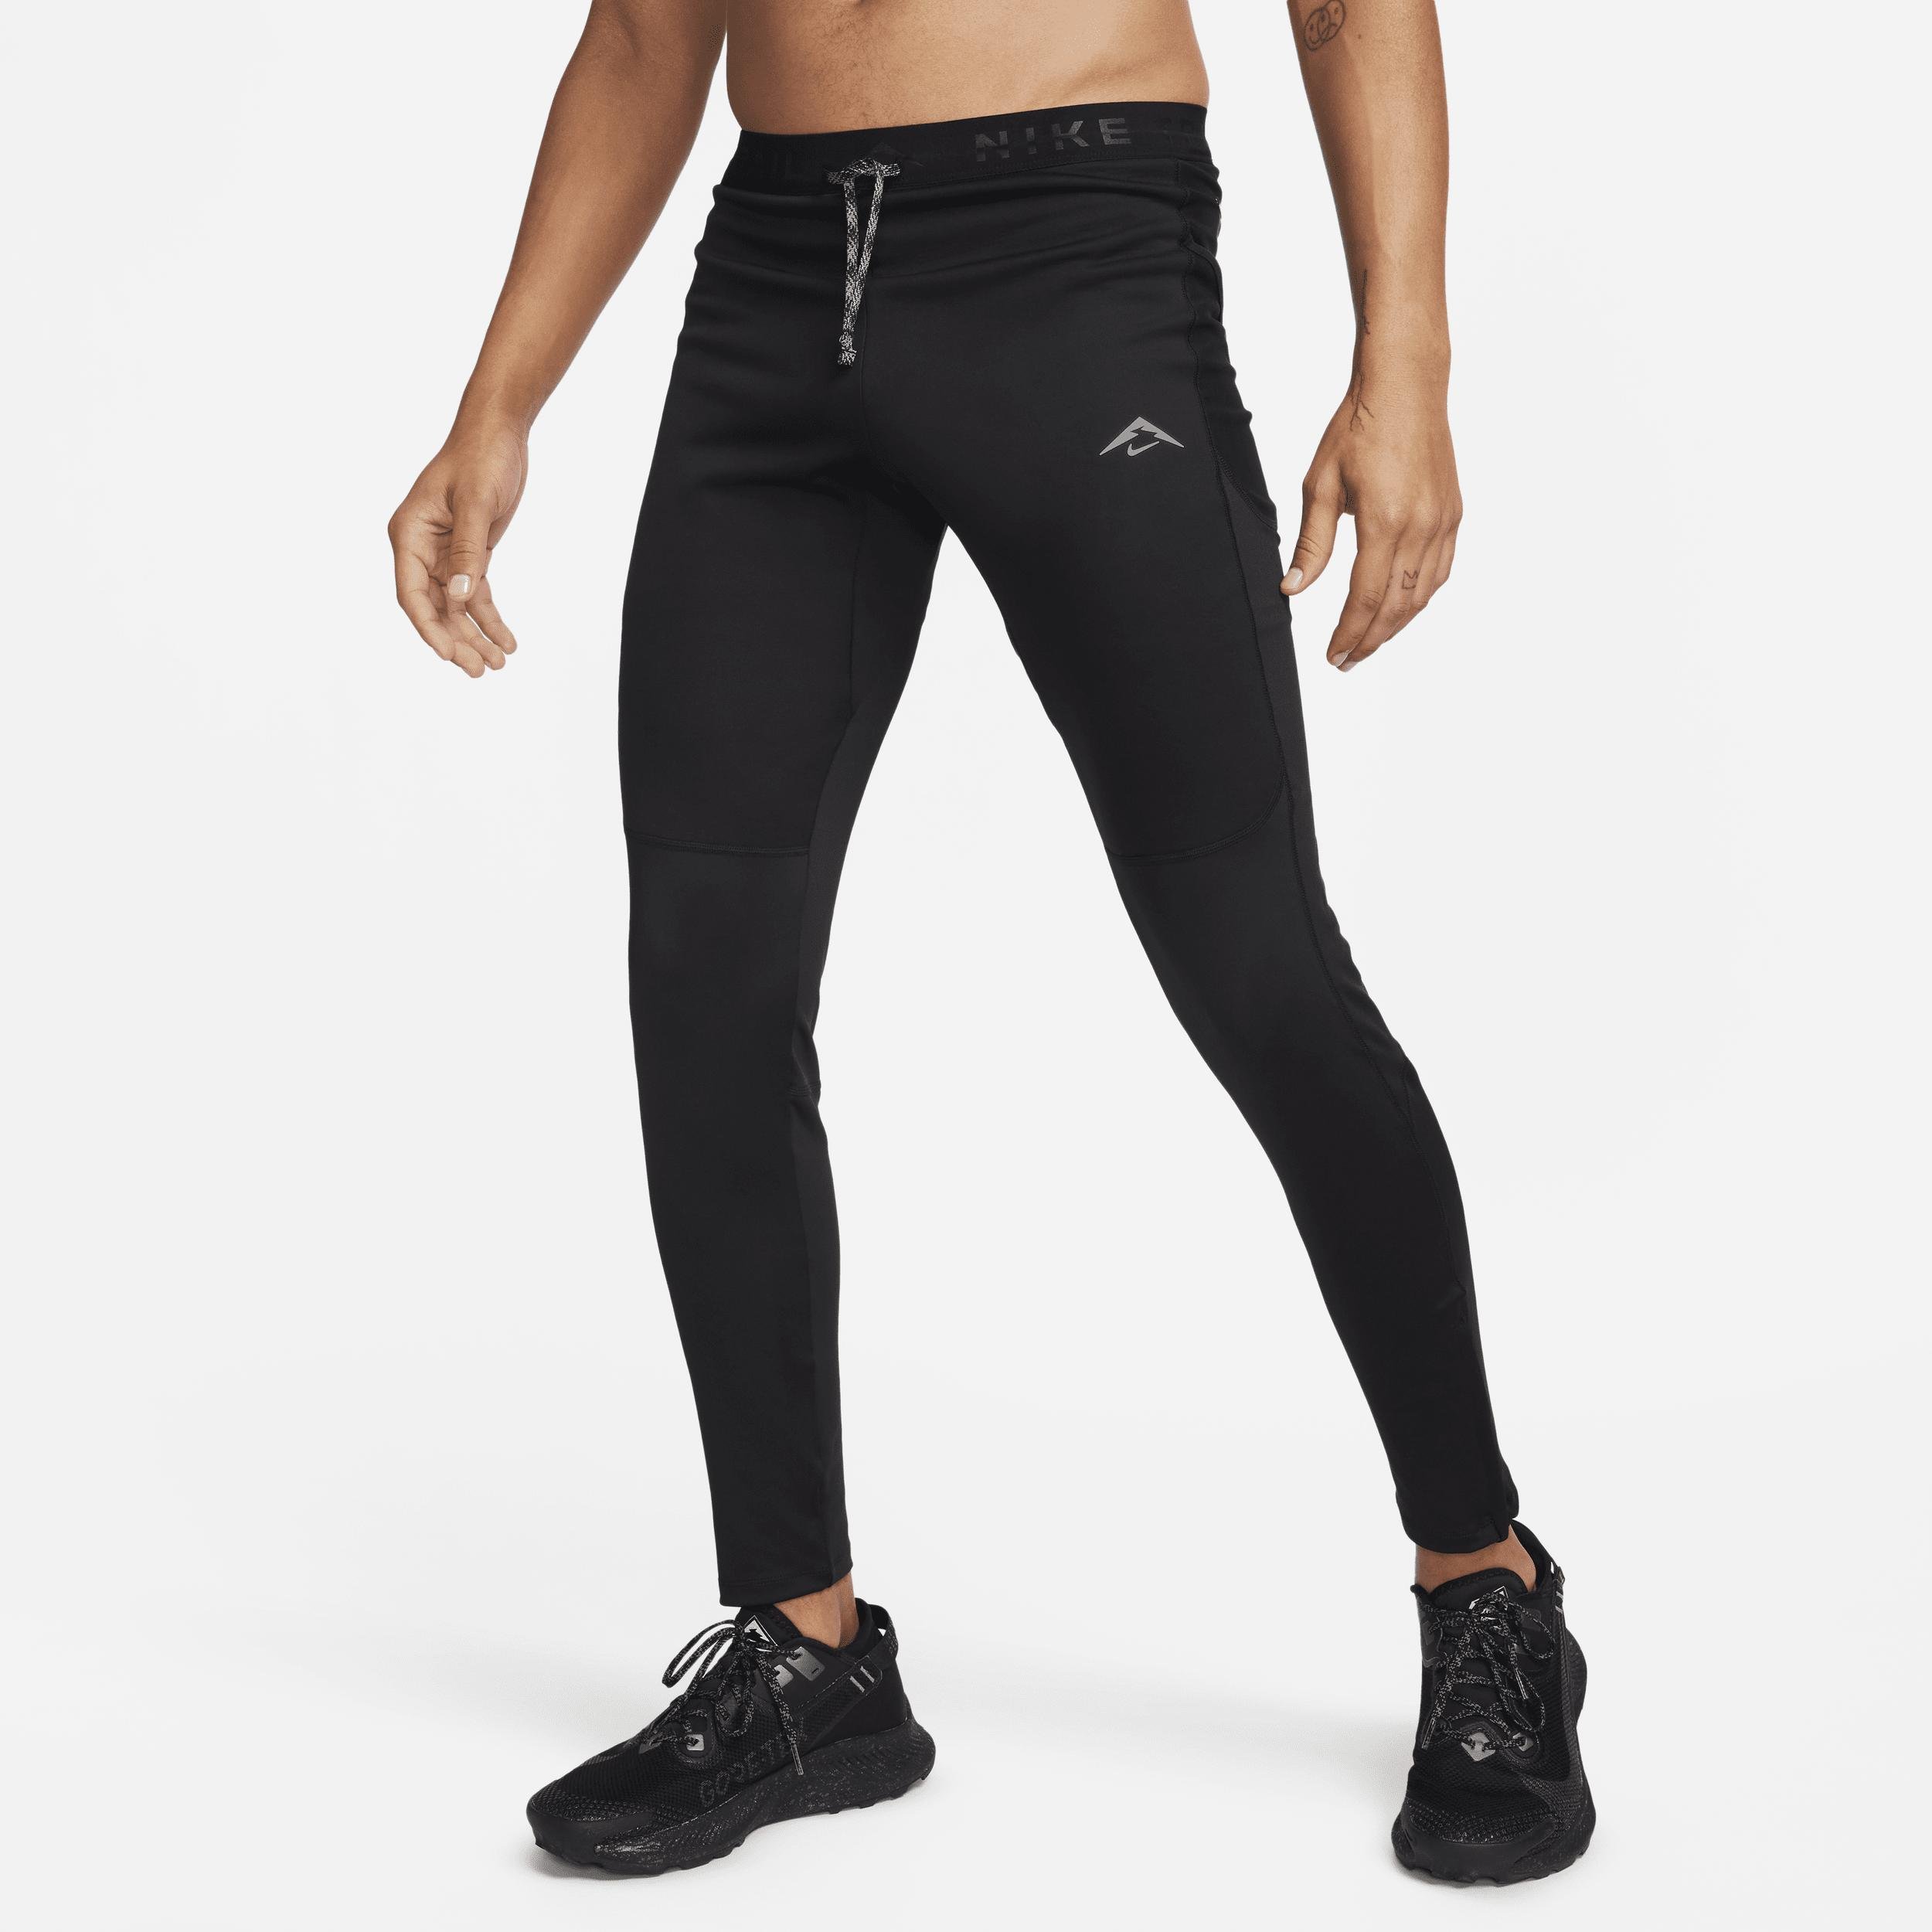 Nike Men's Lunar Ray Winterized Running Tights by NIKE